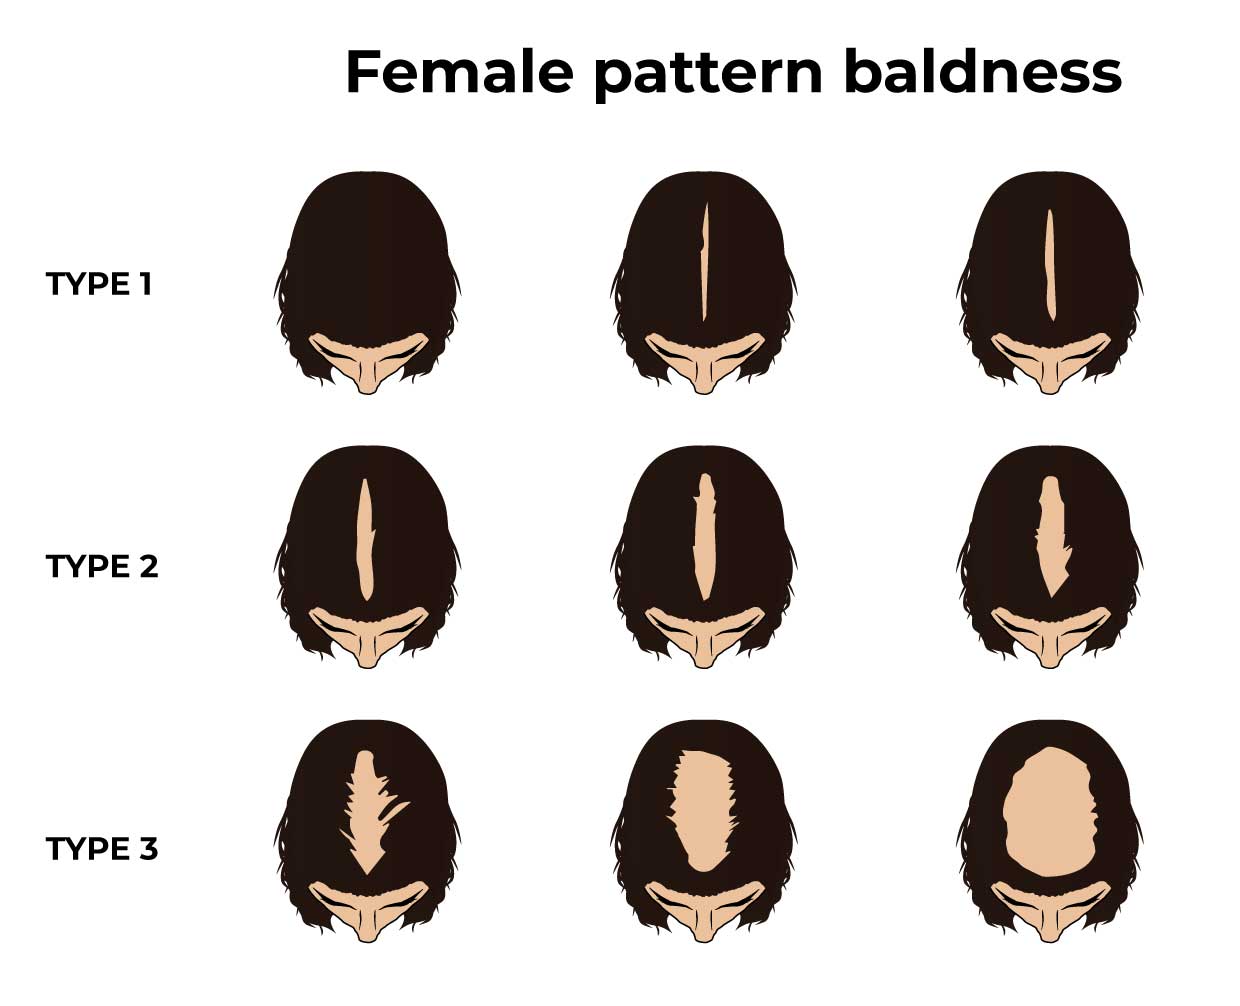 Patterns of female hair loss